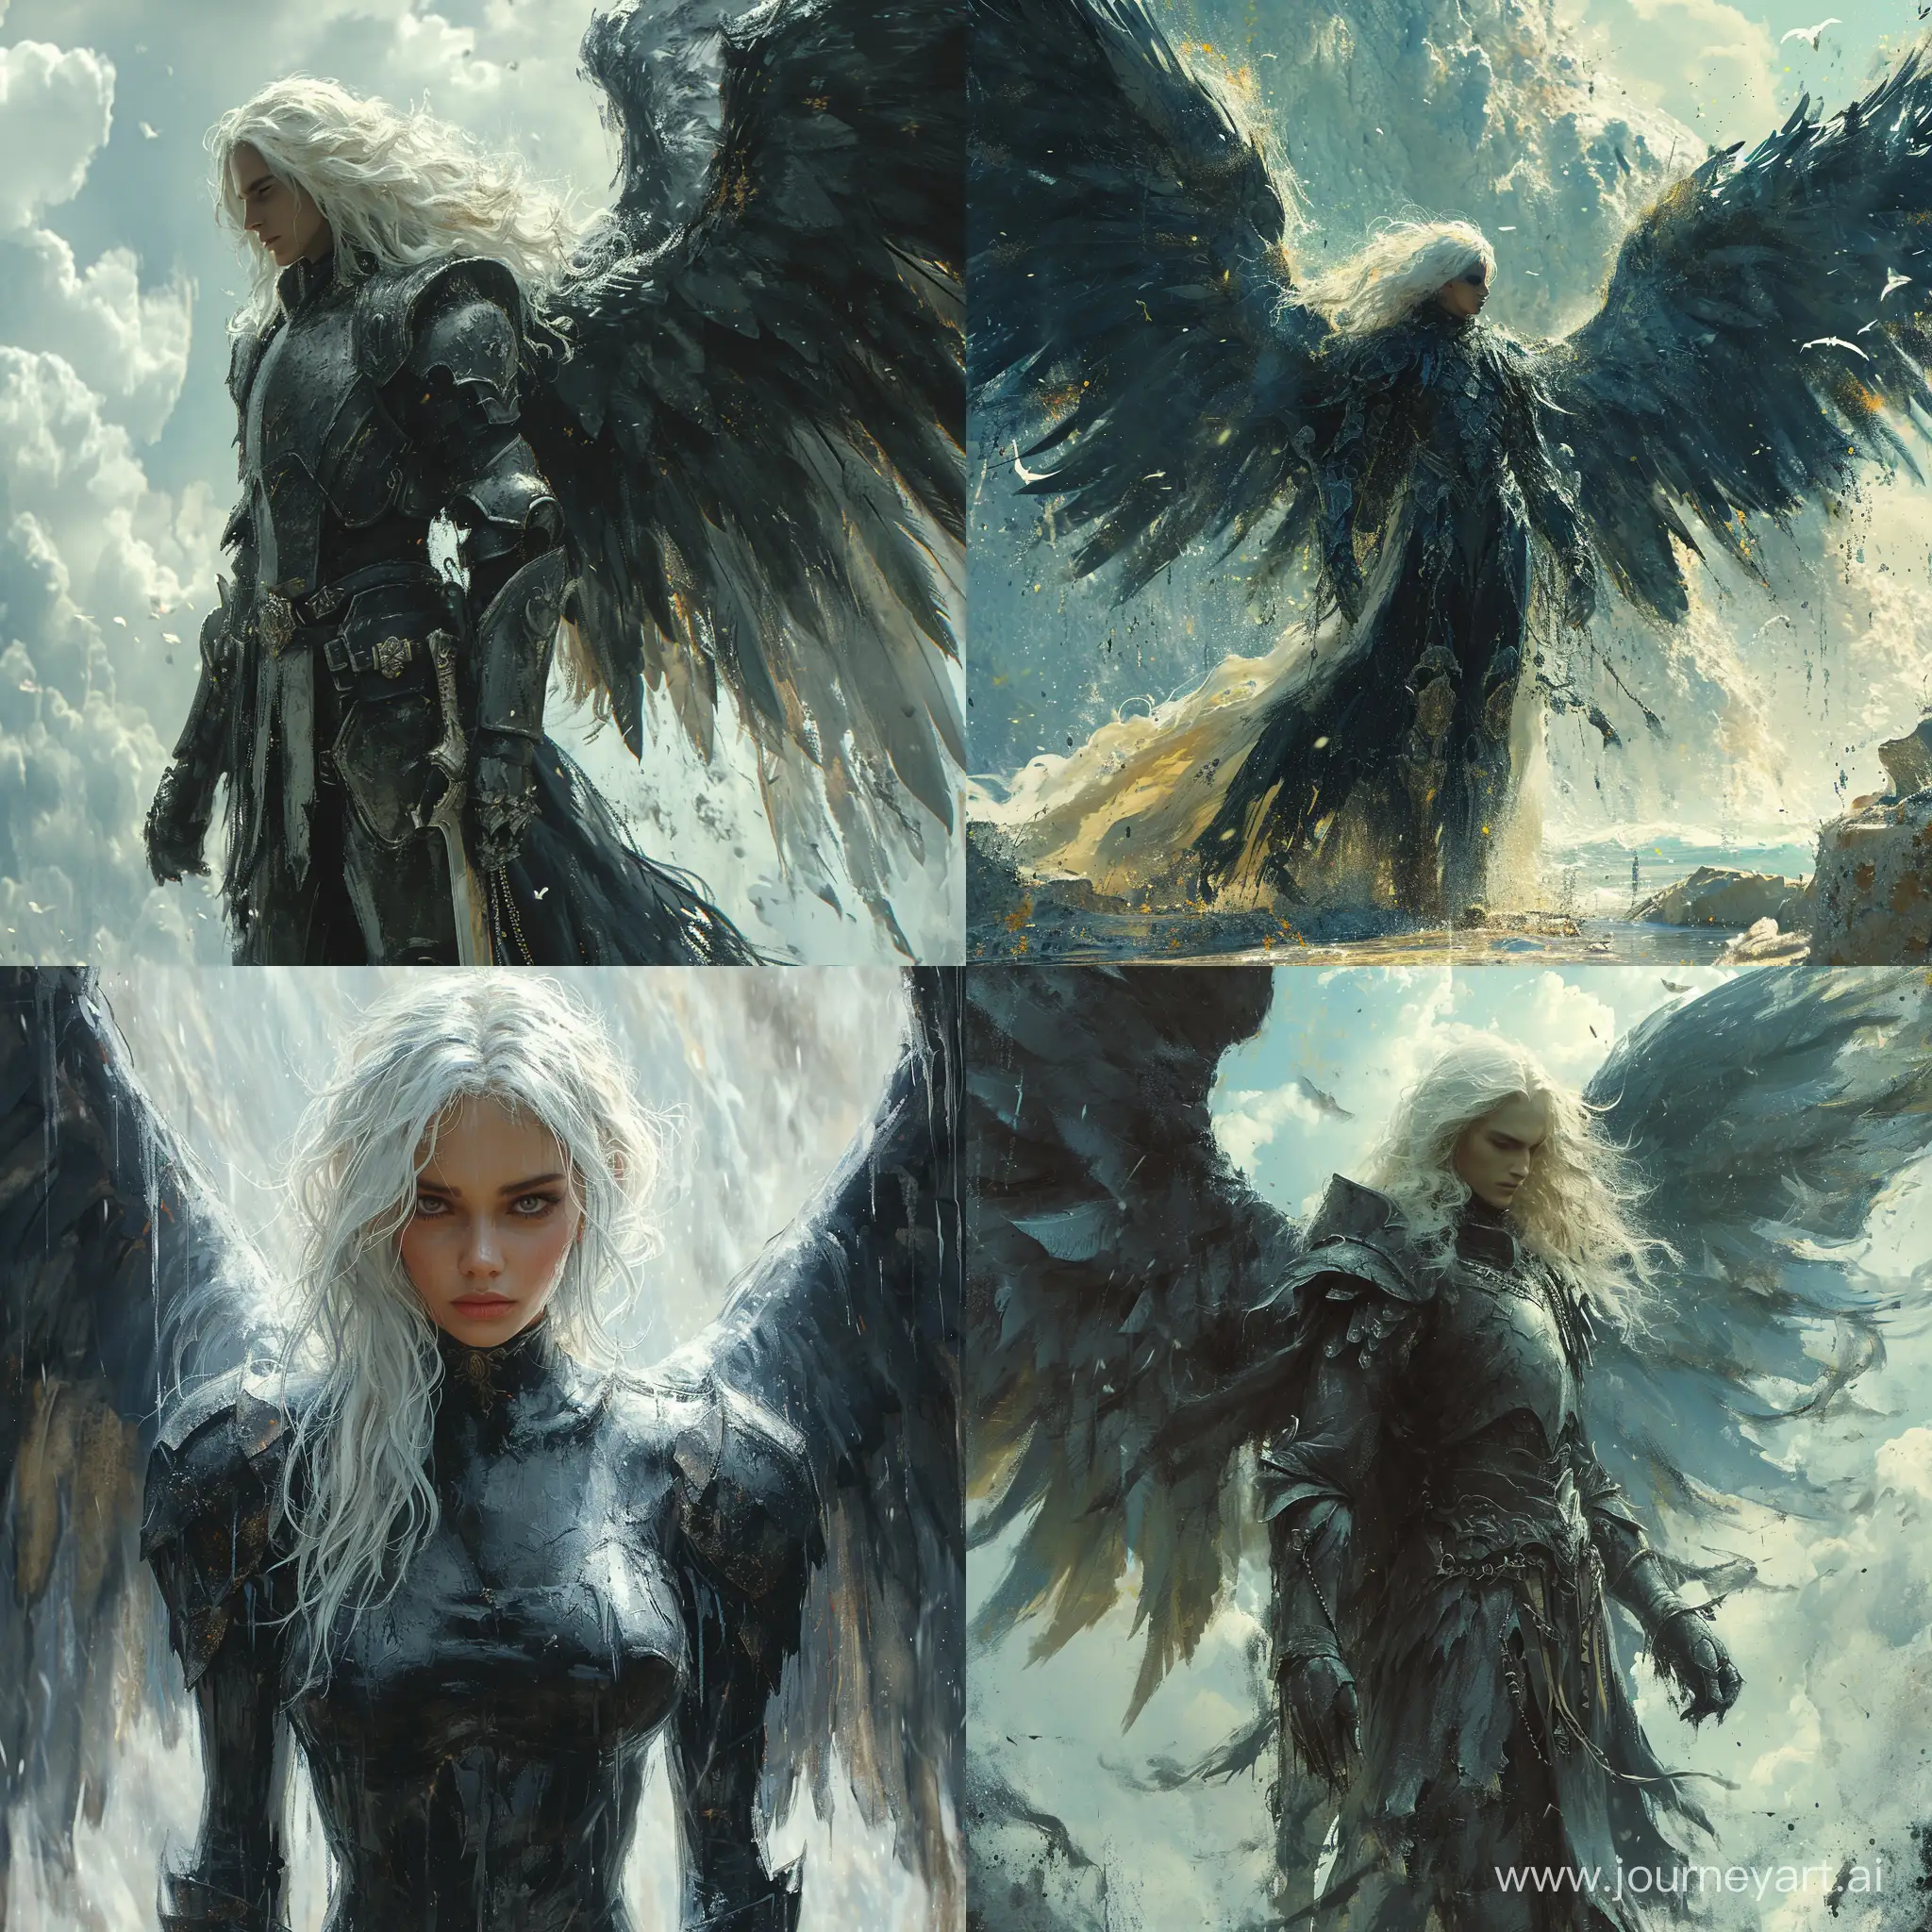 8K, photo, ::1.5, dark angel with large black wings, standing in front of a sky background with white and blue hues, the angel has white hair and is wearing a armor-like outfit, the wings are spread out and there are black paint drips trailing from them, --s 500 --quality 2